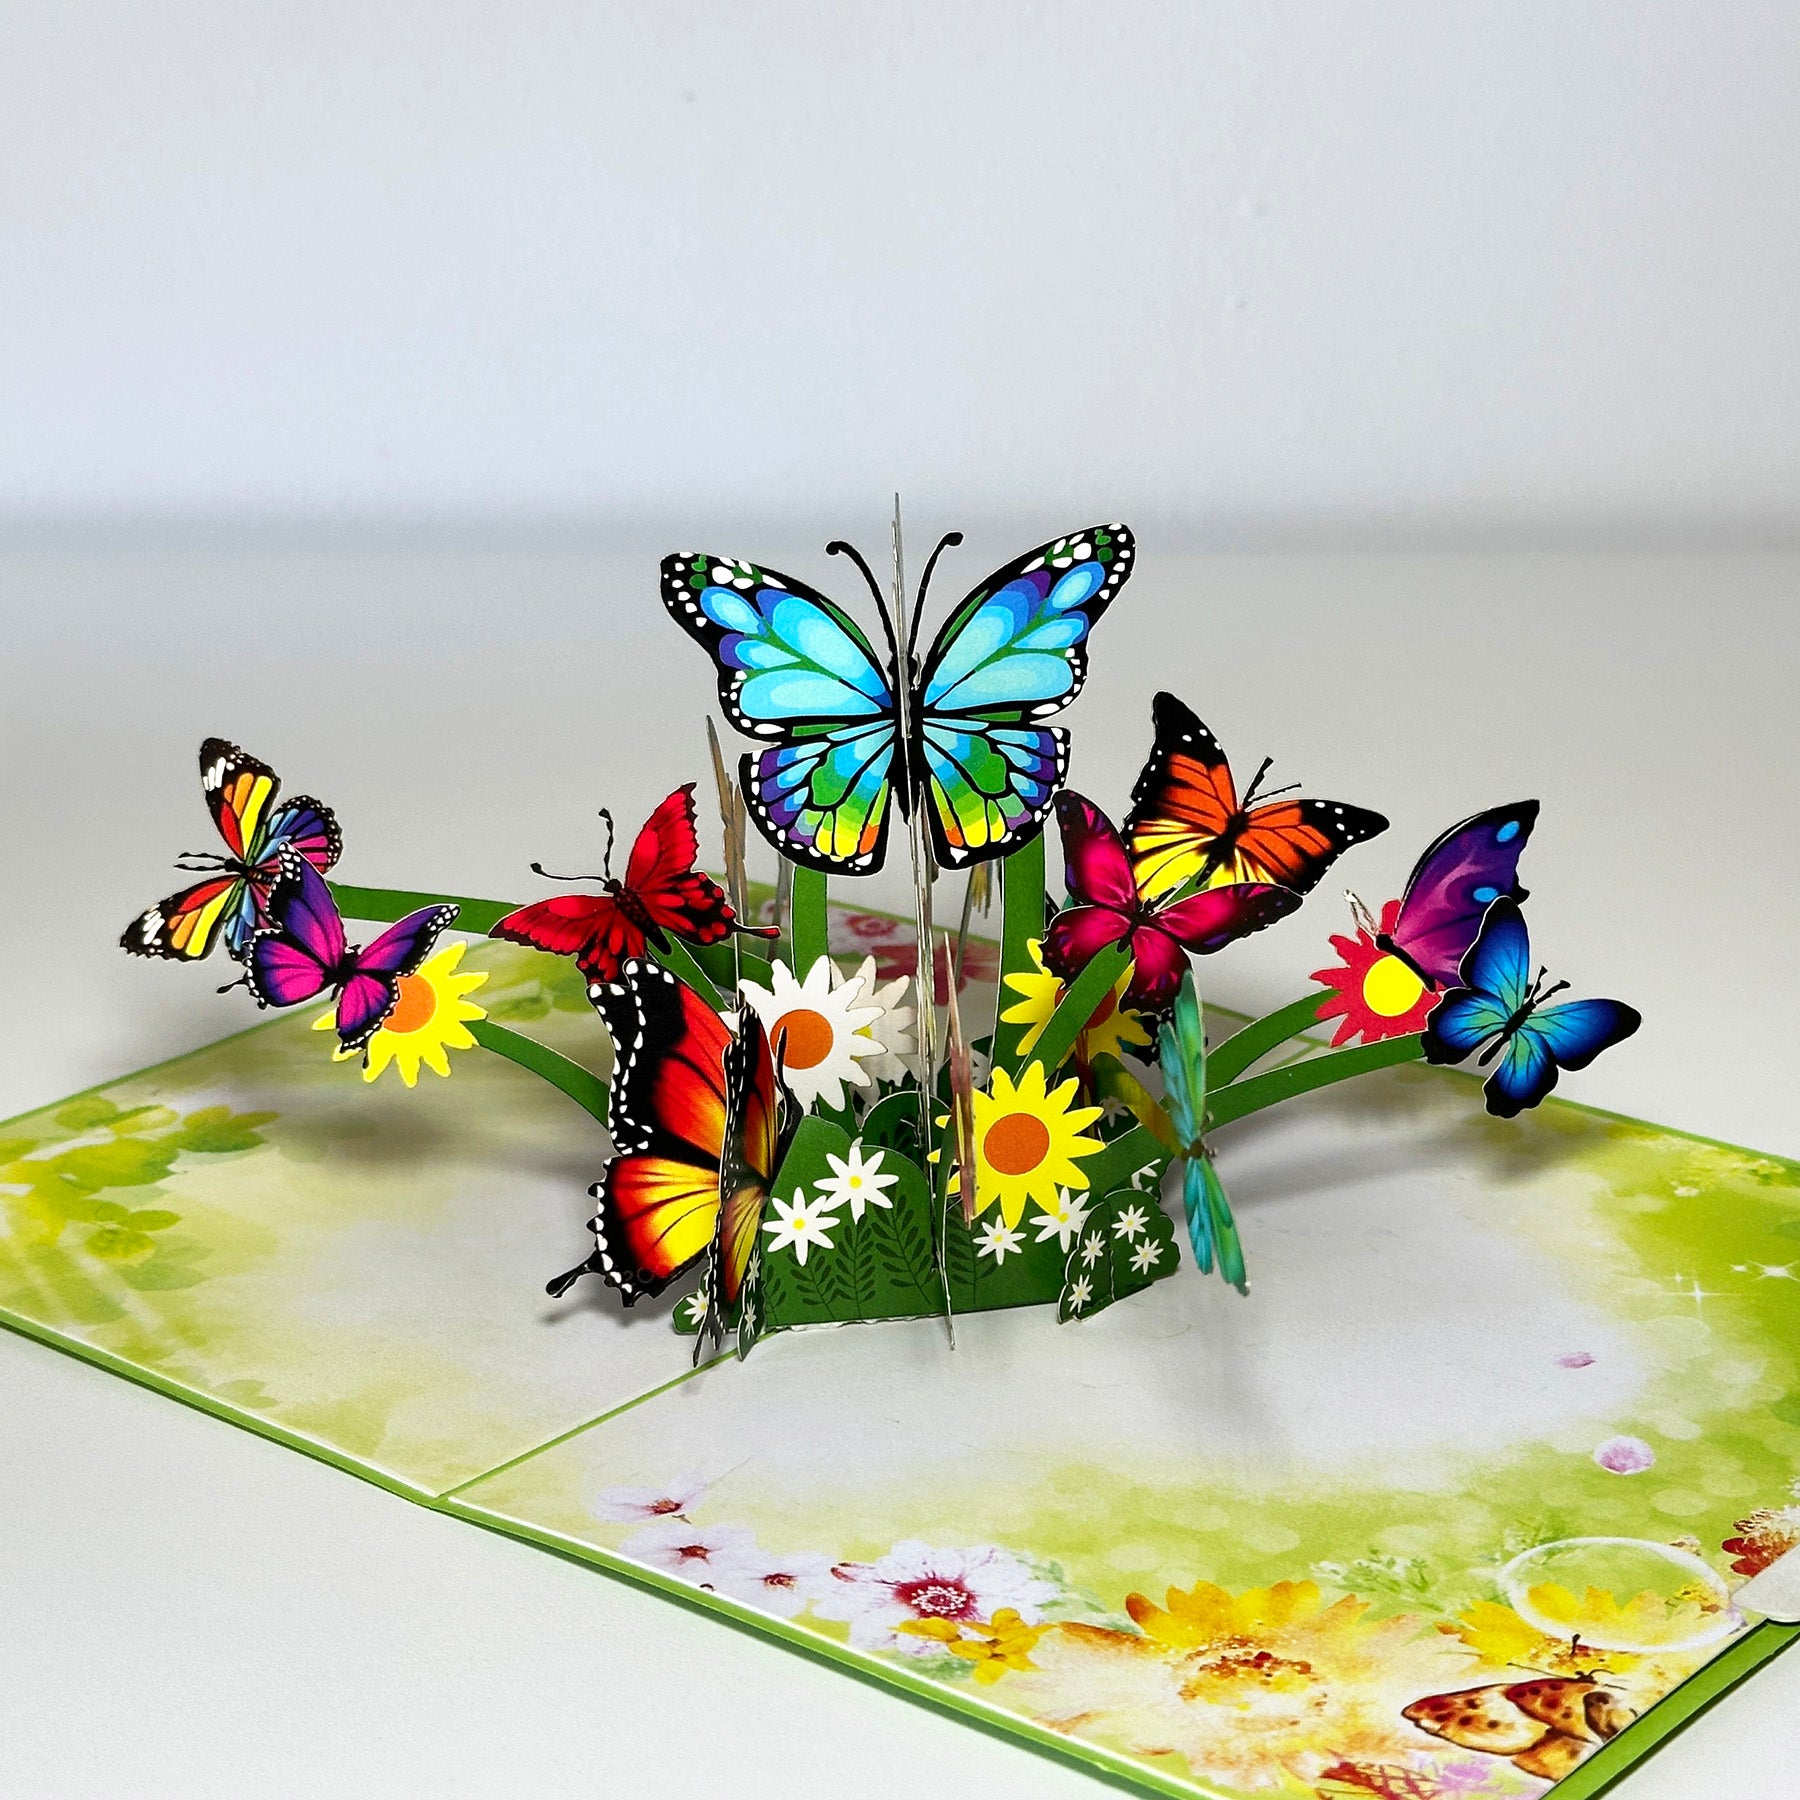 Pop Up Greeting Card Flower Garden Butterfly Card Pop-Up Card Blossoming Card Colorful Card Spring Card Flowers Card Nature Gift Lover